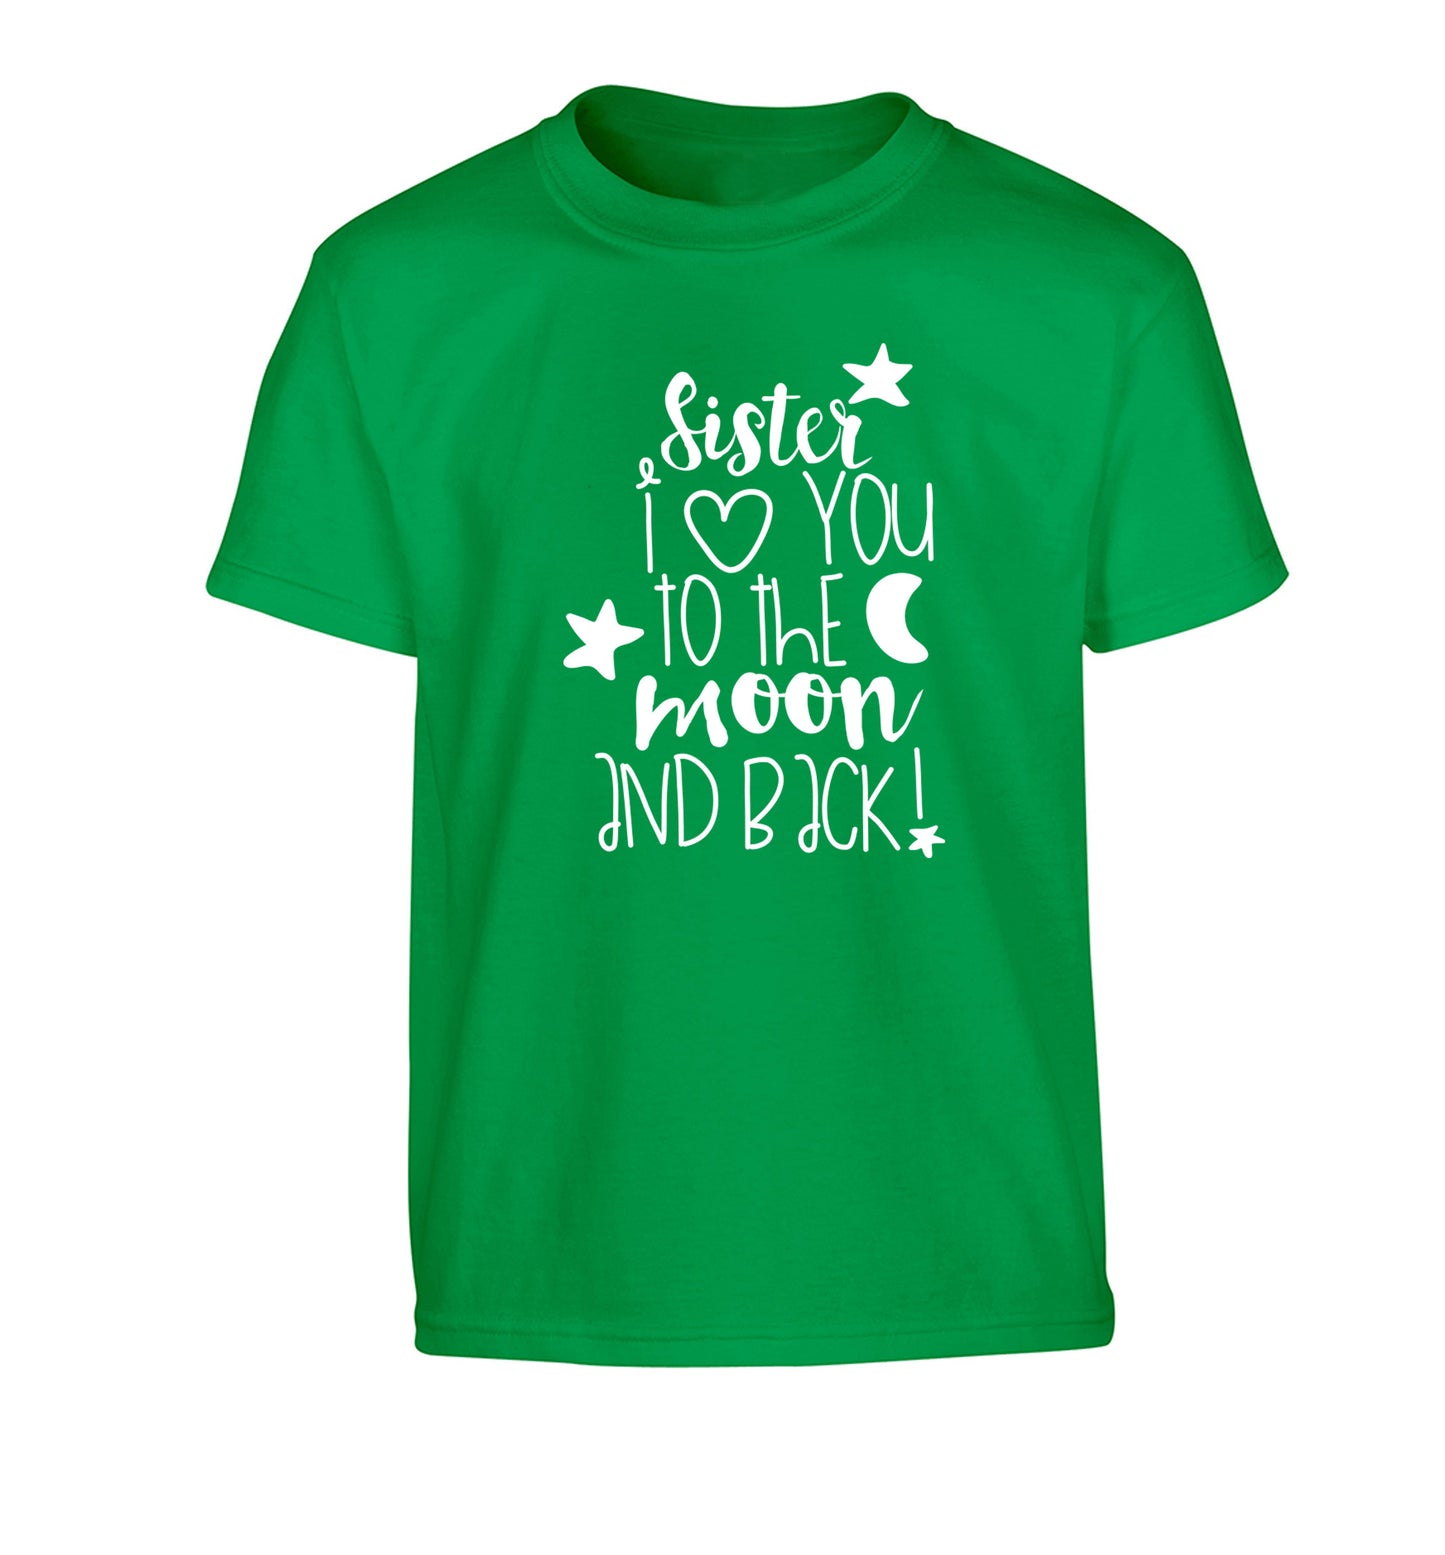 Sister I love you to the moon and back Children's green Tshirt 12-14 Years